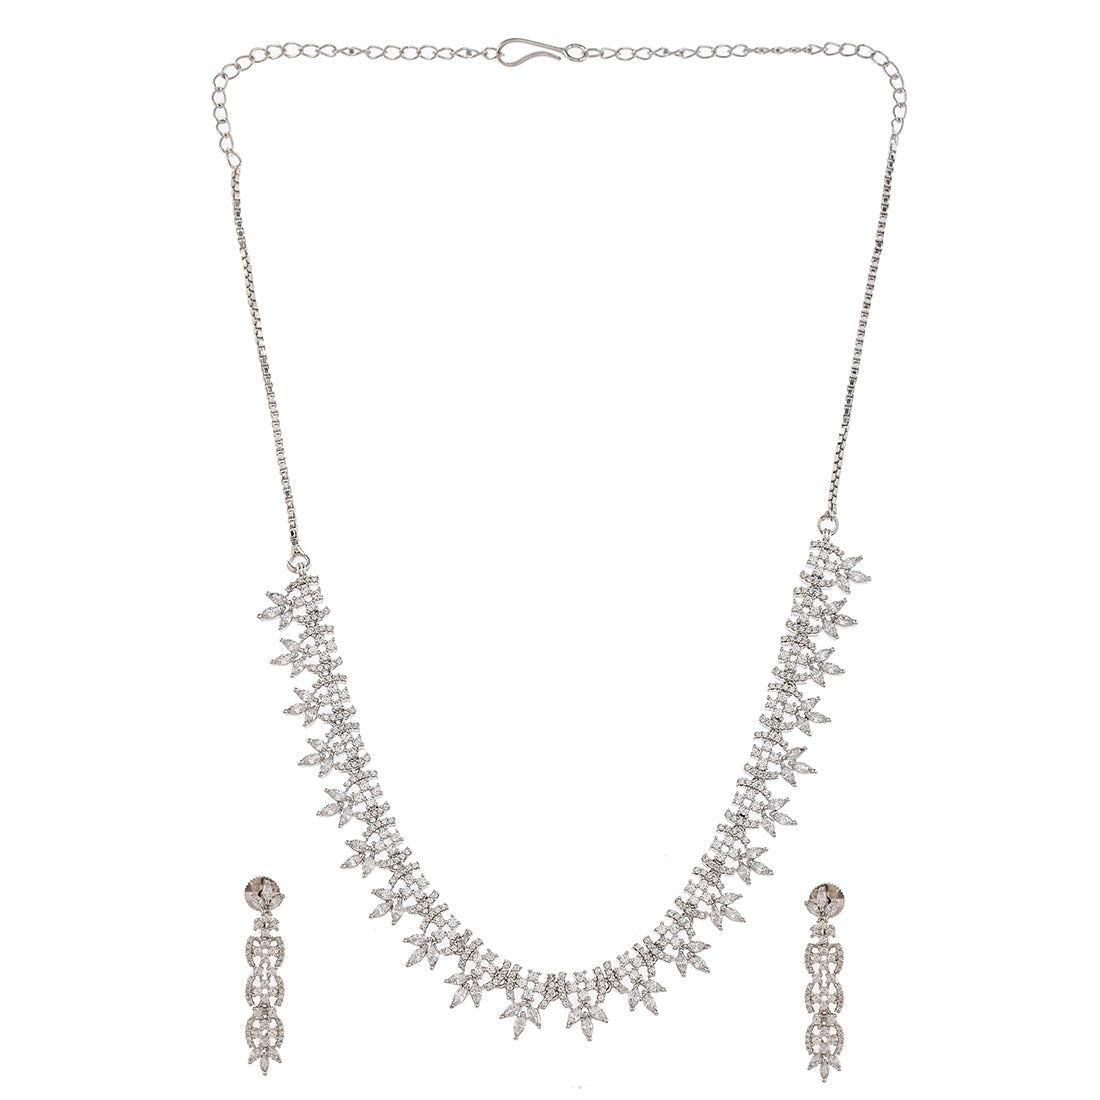 Women's Cz Elegance Silver Plated Brass Made Leafy Necklace And Earrings - Voylla